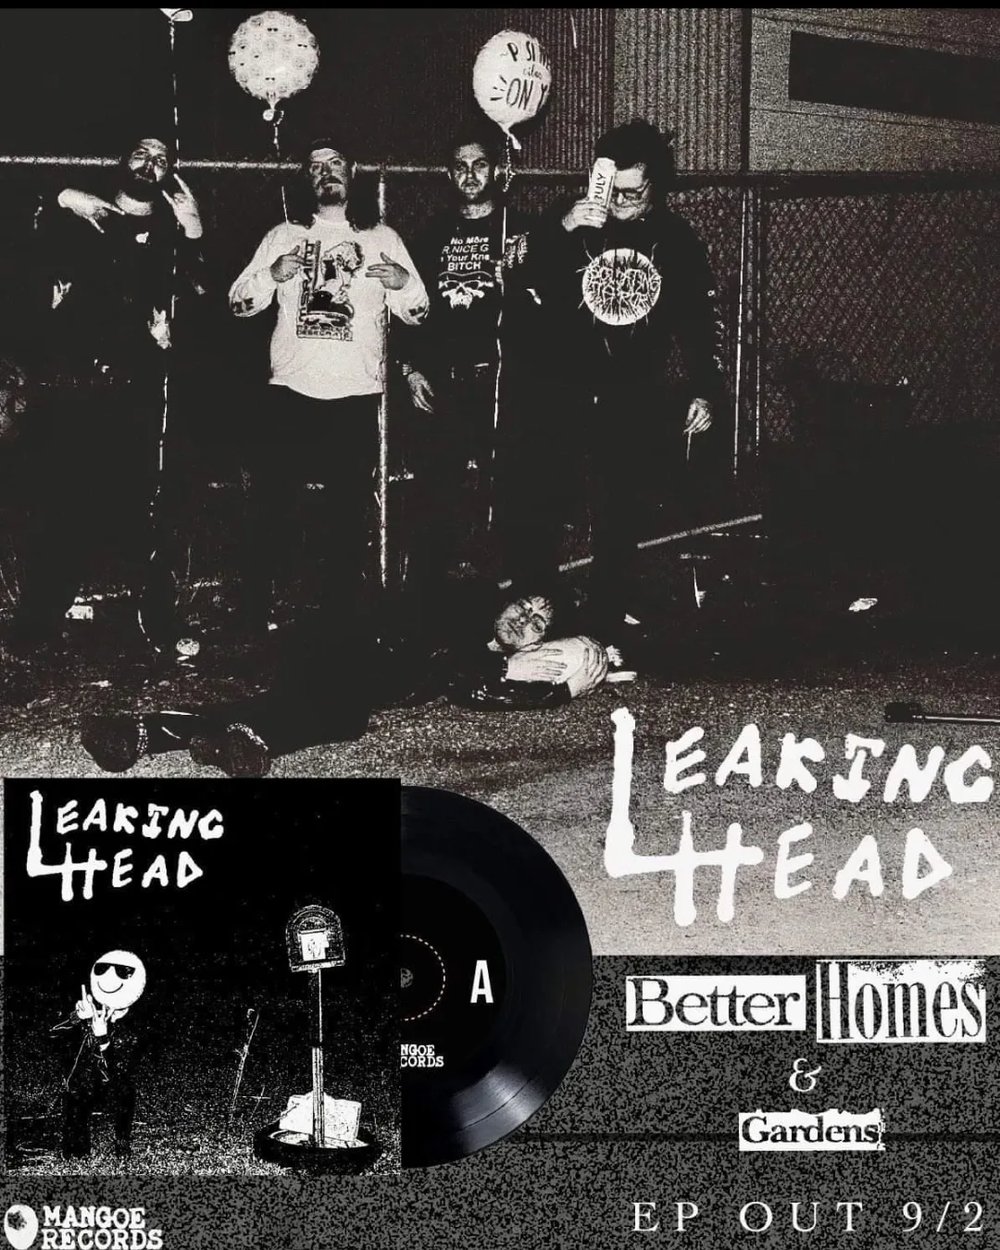 Leaking Head-"Better Homes and Gardens"